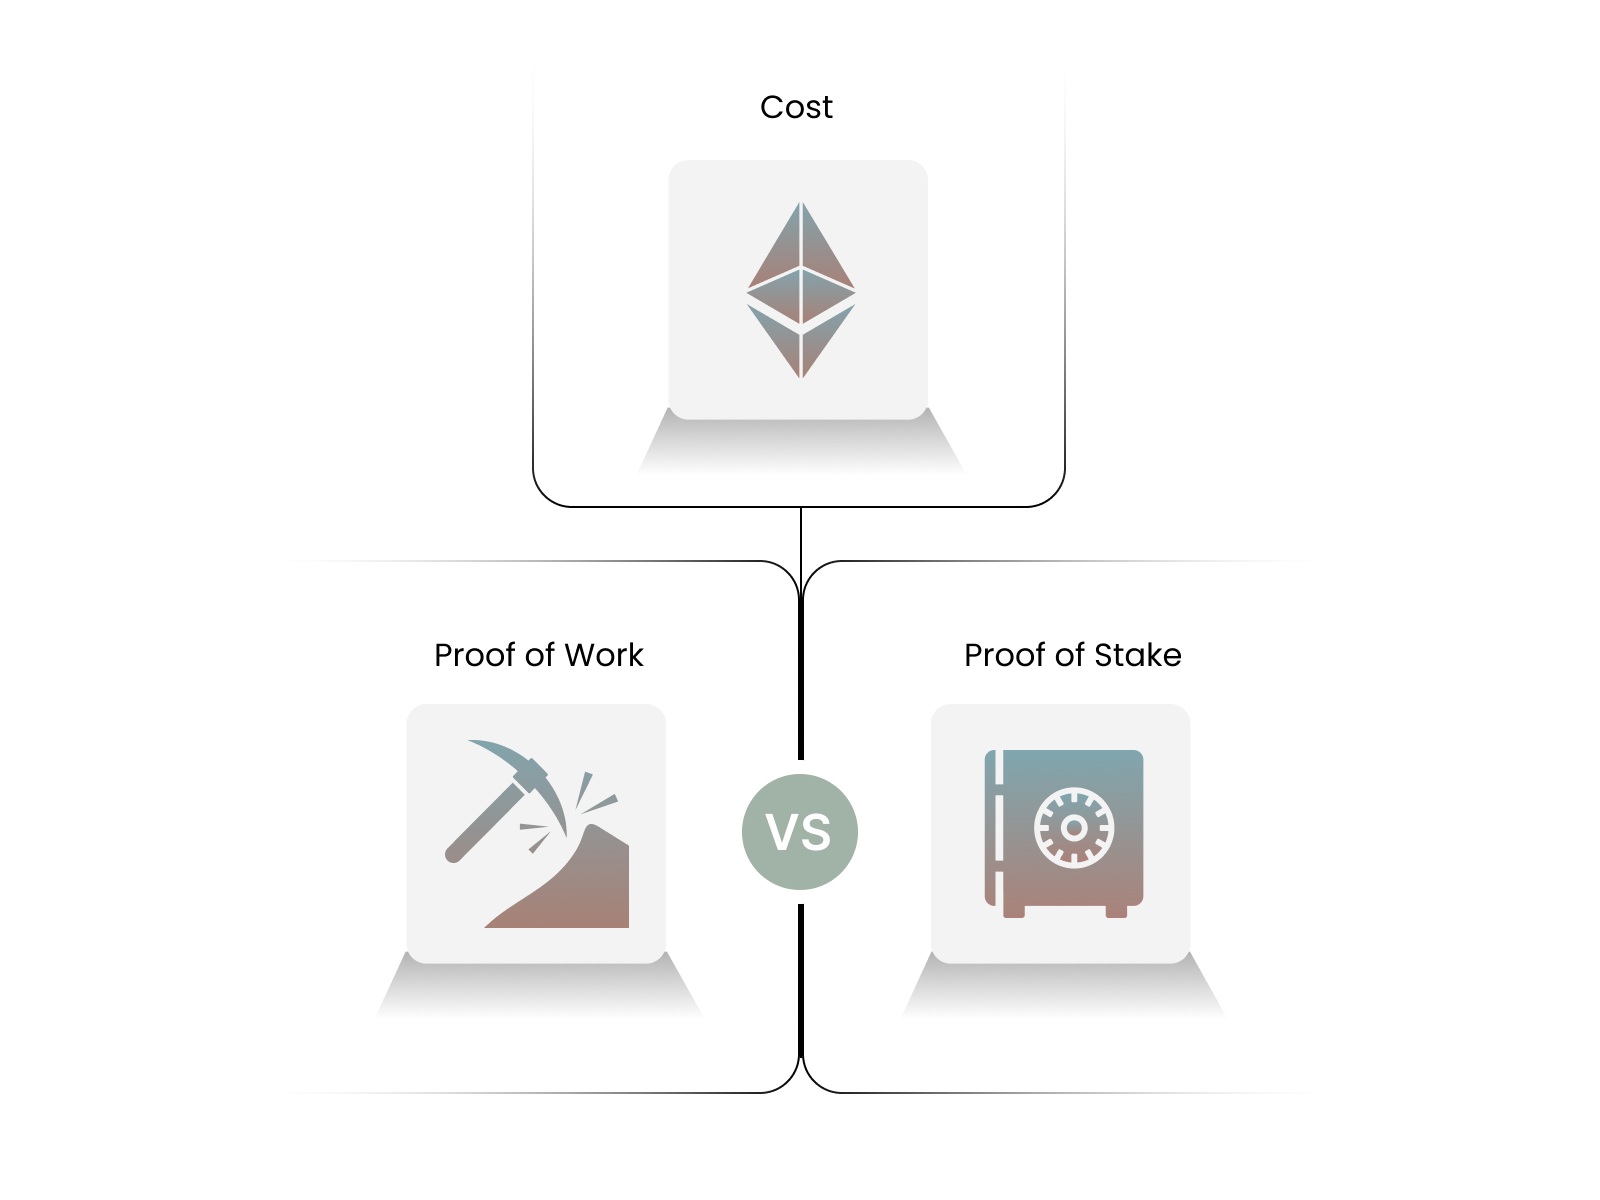 Proof Of Work vs Proof Of Stake: Cost